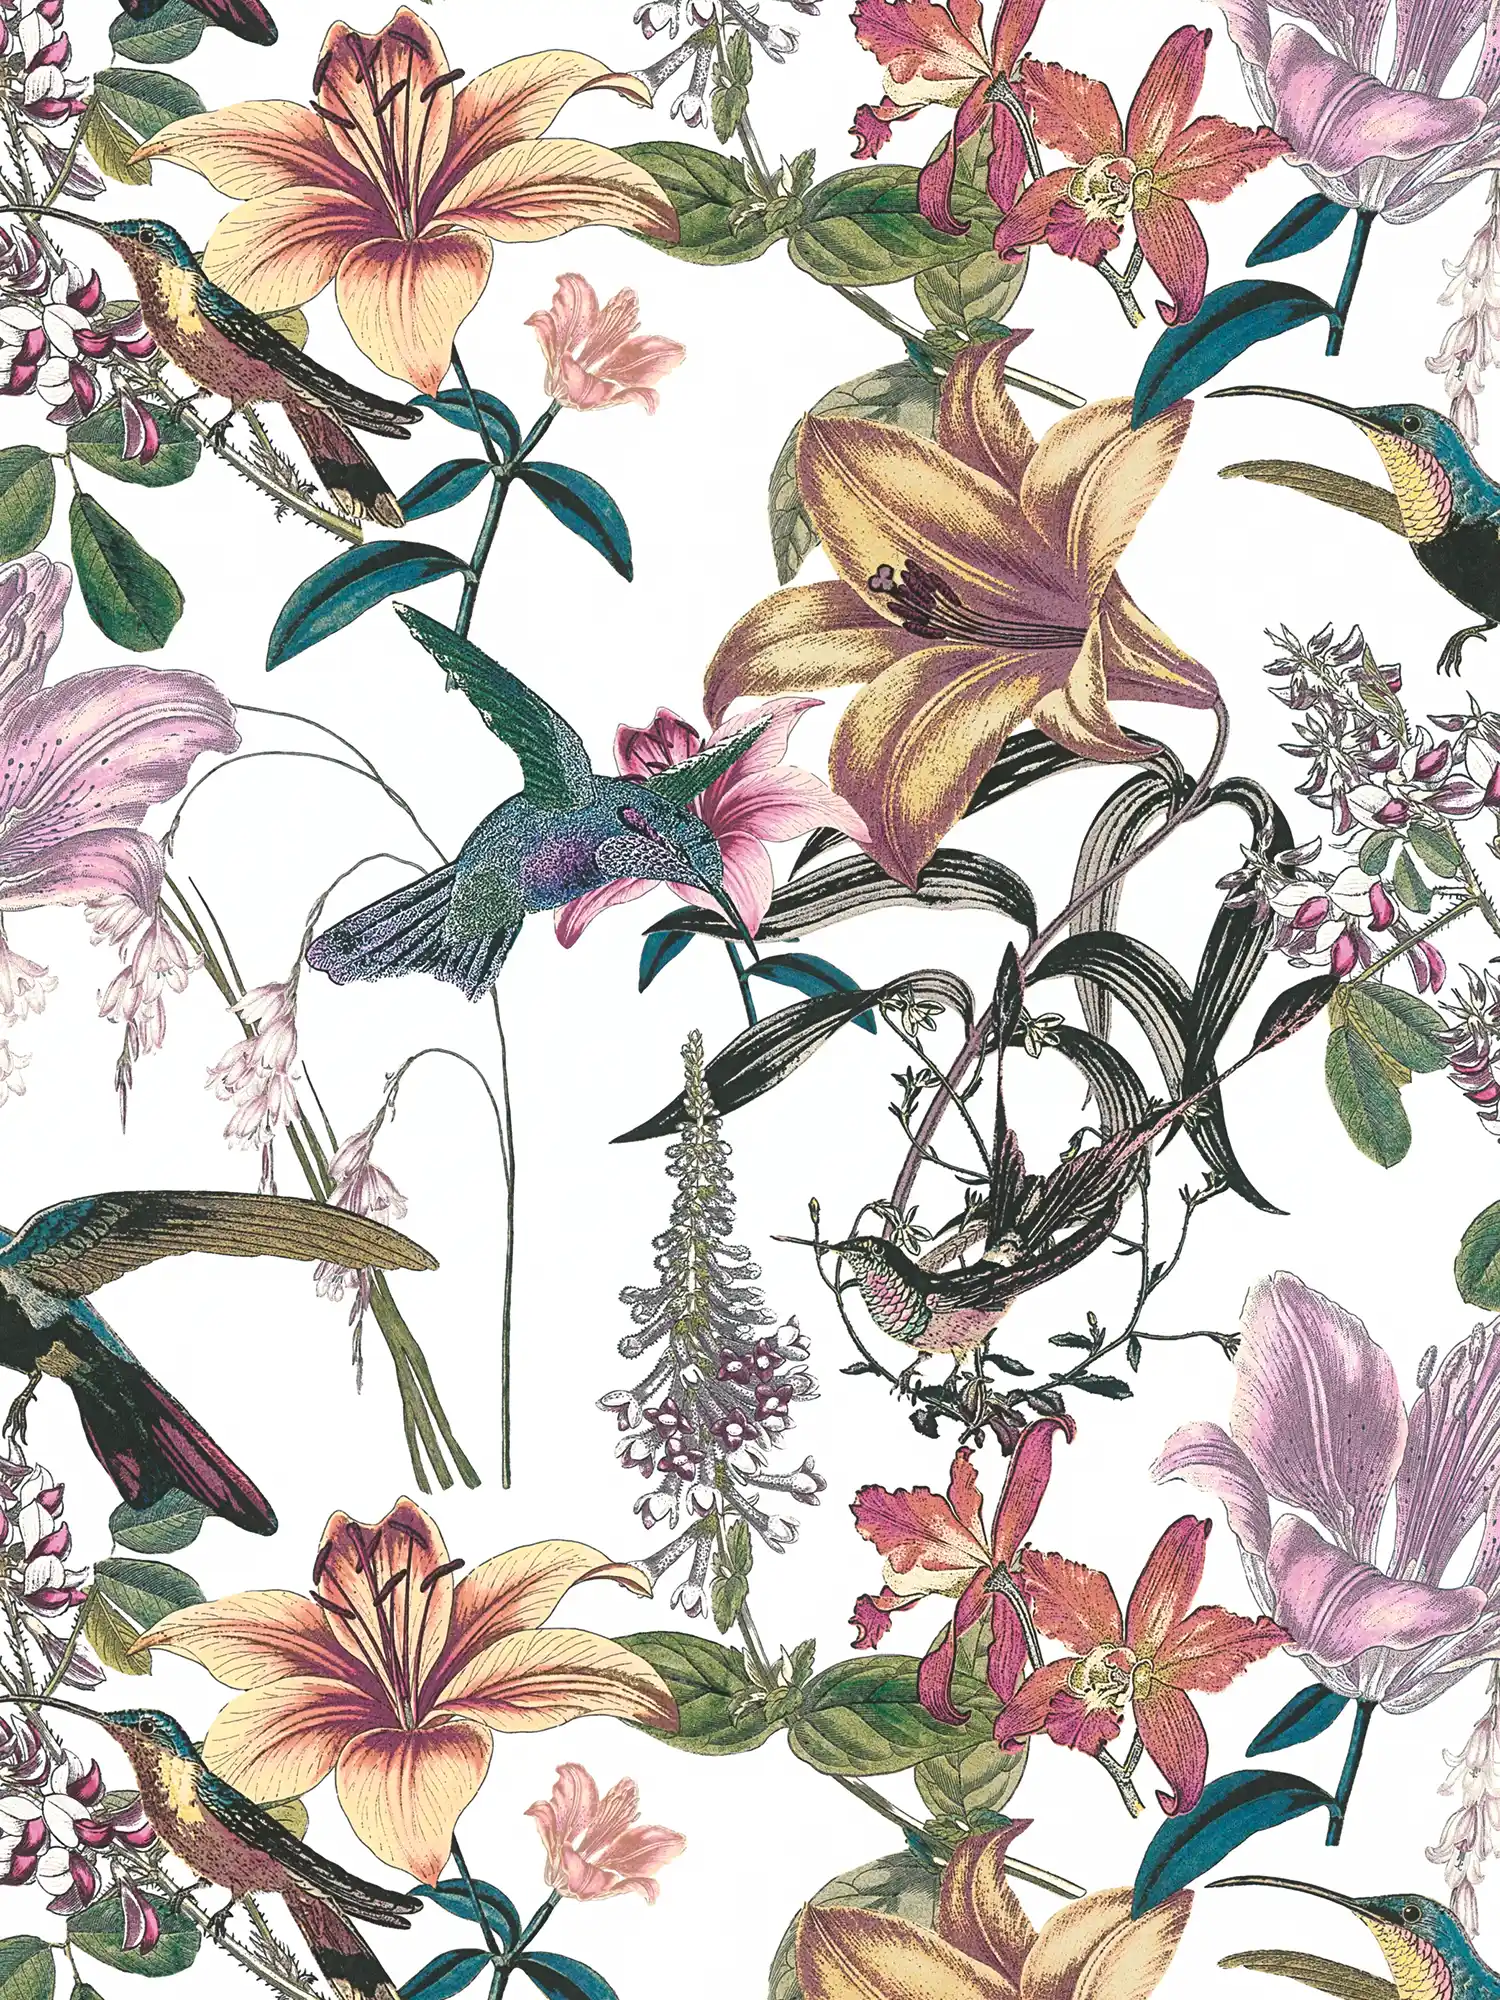         Colorful floral wallpaper with hummingbird design - colourful, green, yellow
    